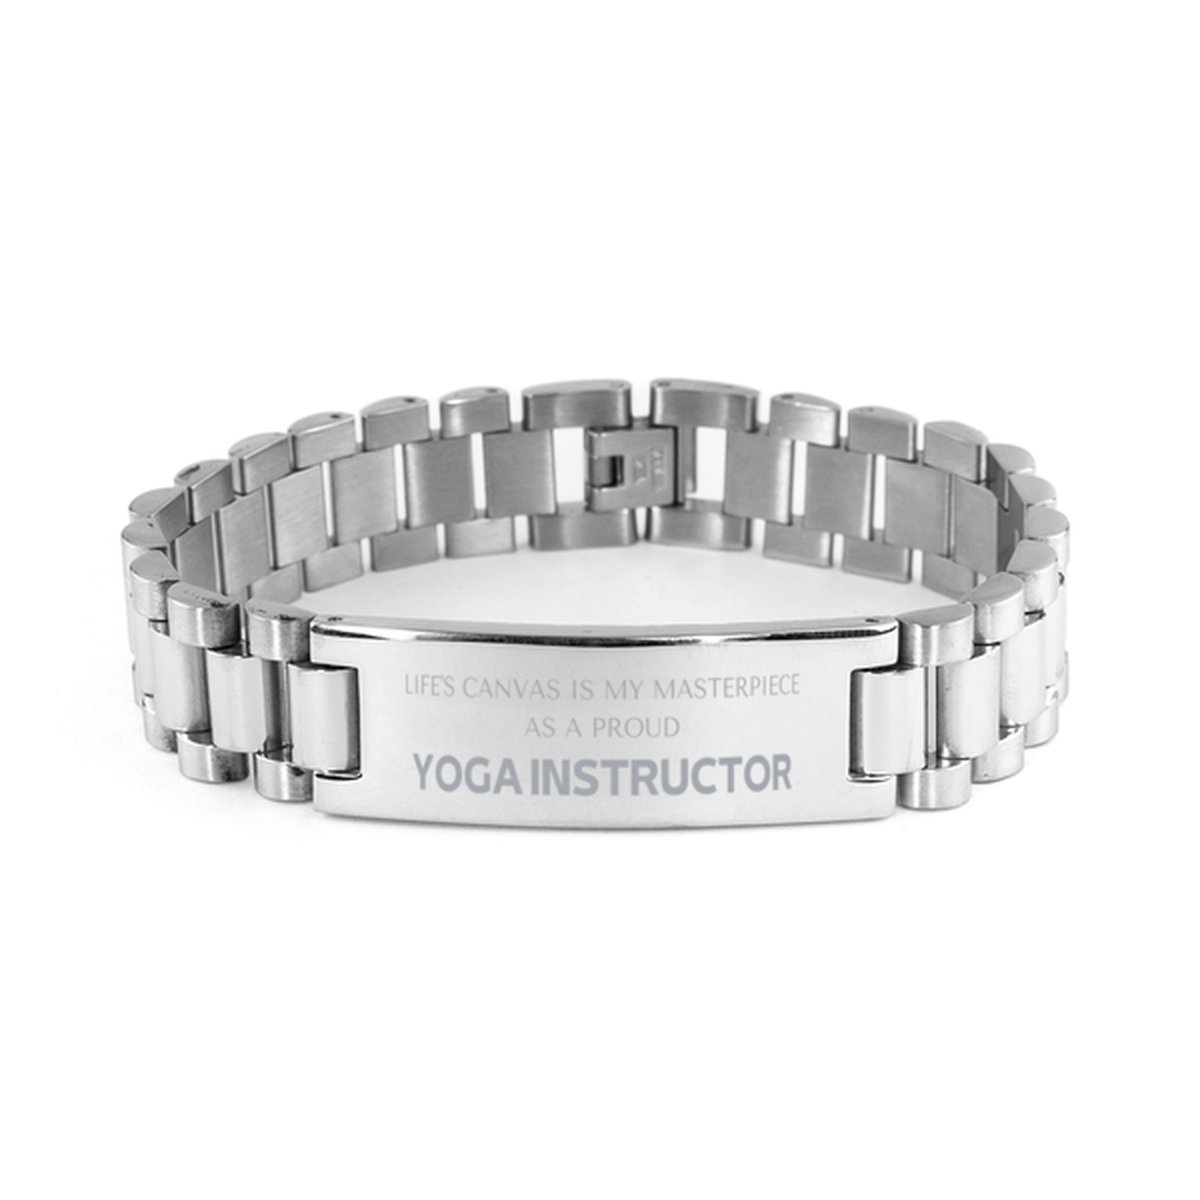 Proud Yoga Instructor Gifts, Life's canvas is my masterpiece, Epic Birthday Christmas Unique Ladder Stainless Steel Bracelet For Yoga Instructor, Coworkers, Men, Women, Friends